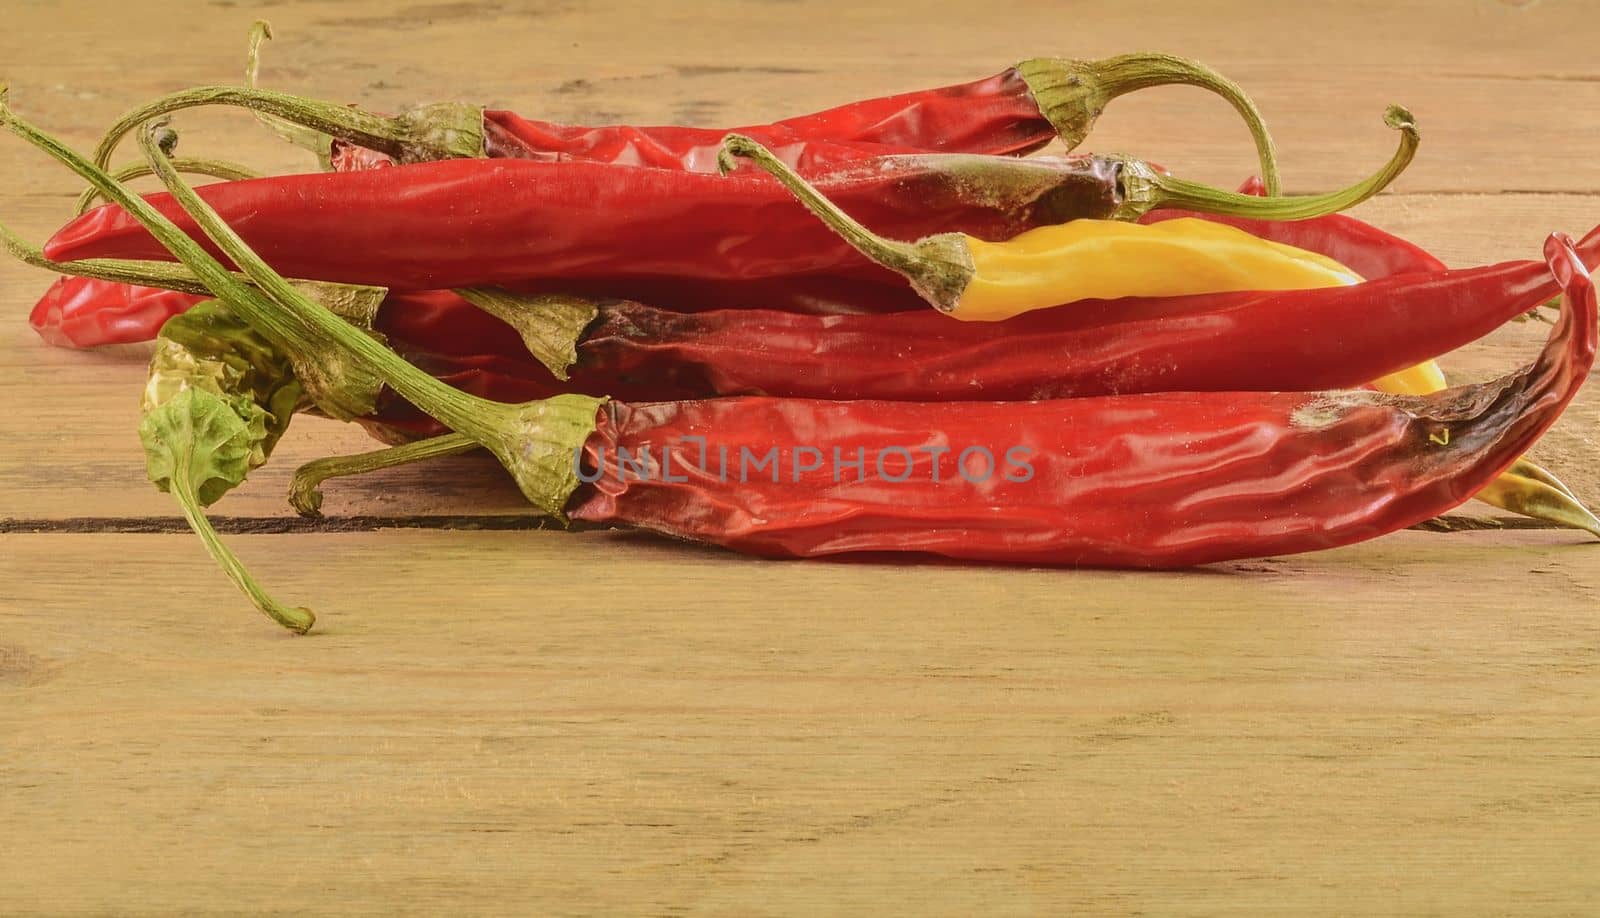 Shrinking and mould chili peppers on white wooden background. Rotten chili peppers by roman_nerud